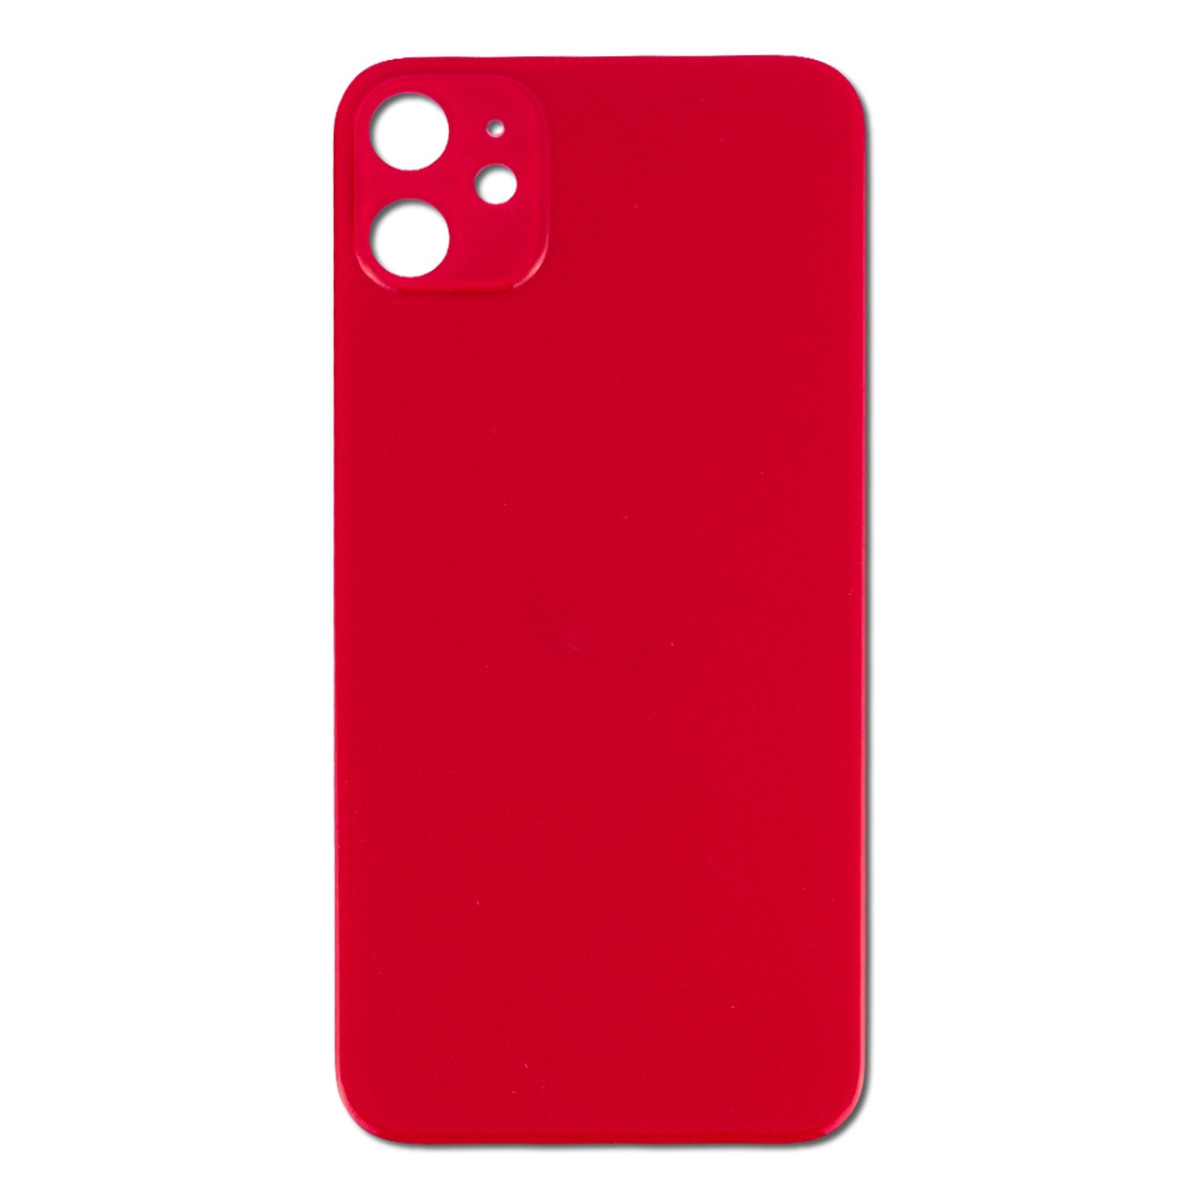 BODY IPHONE 11 BACK GLASS RED